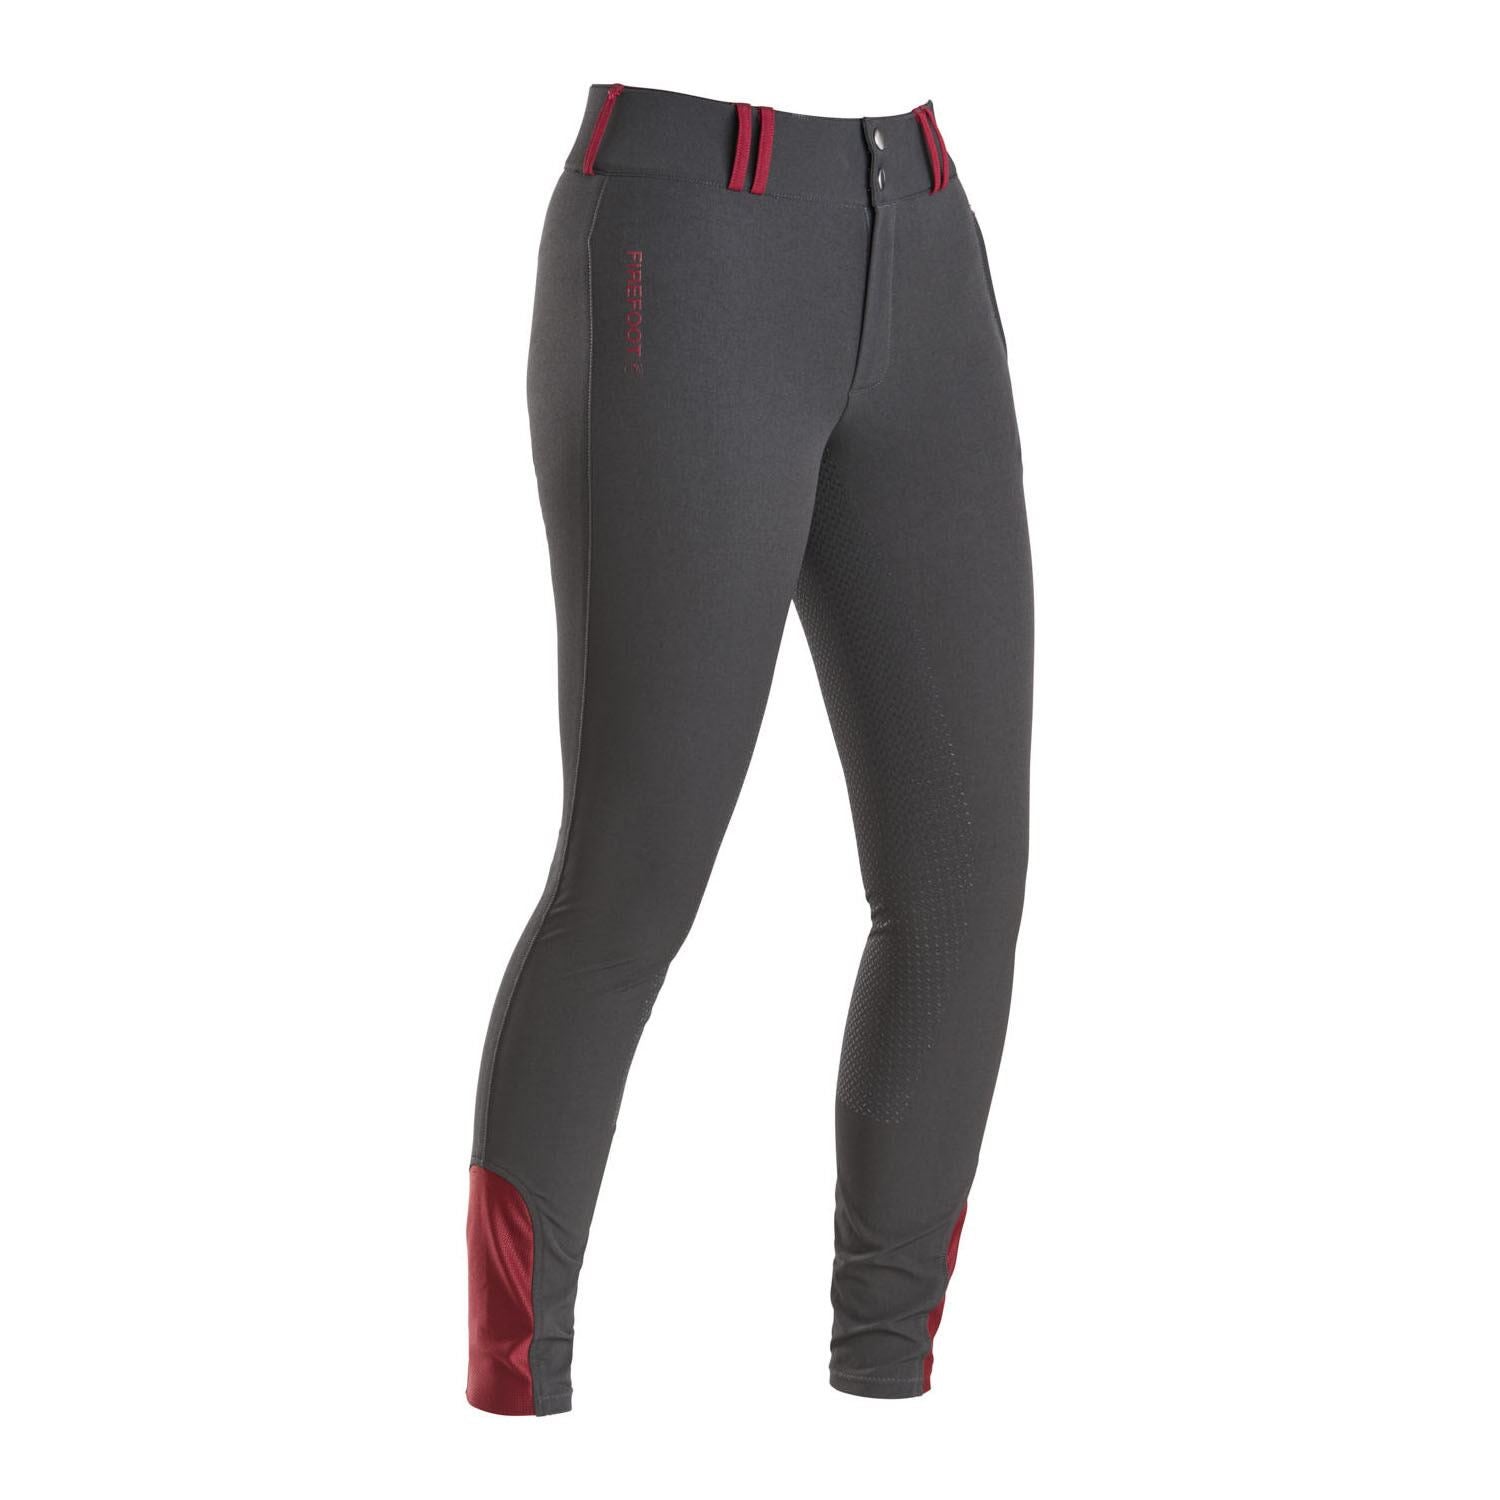 Firefoot Emley Four Way Stretch Breeches Ladies - Just Horse Riders